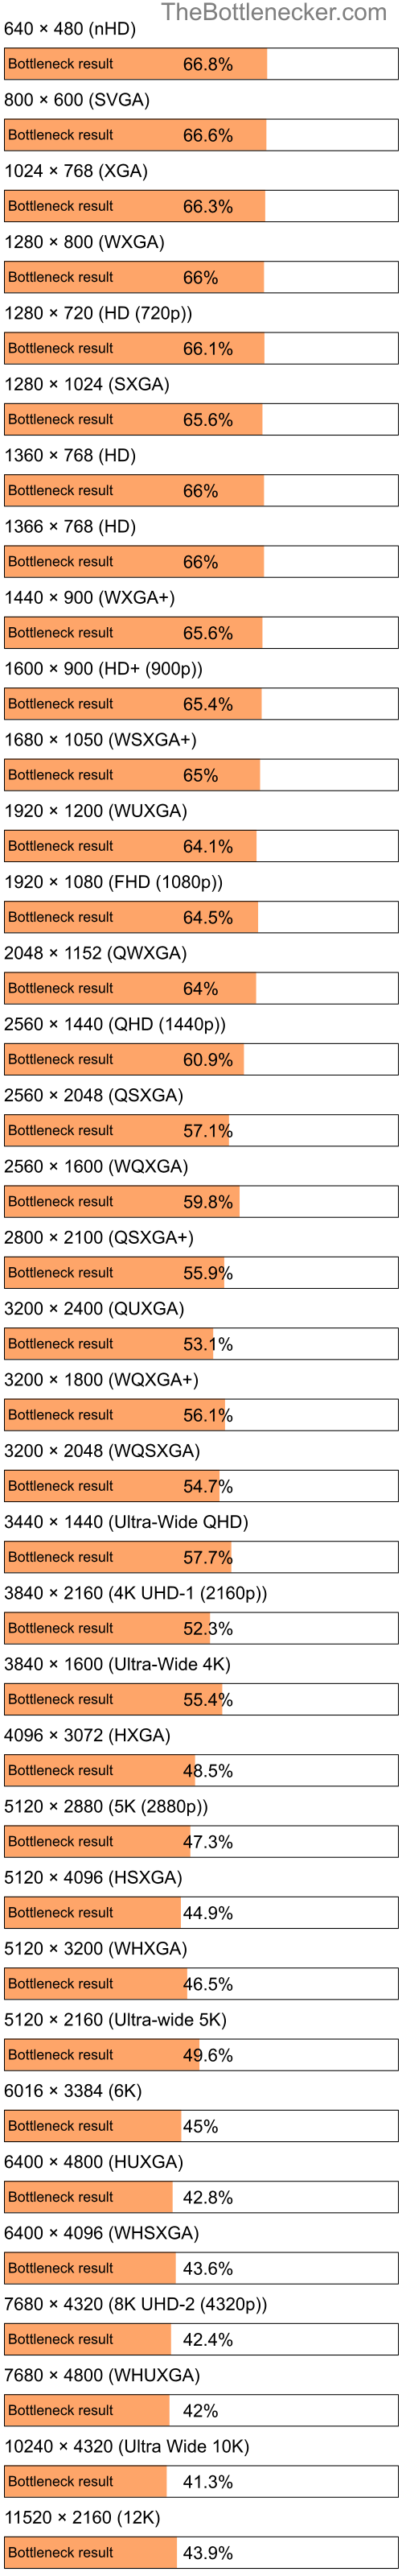 Bottleneck results by resolution for Intel Core i7-4790 and NVIDIA GeForce RTX 3080 in Processor Intense Tasks